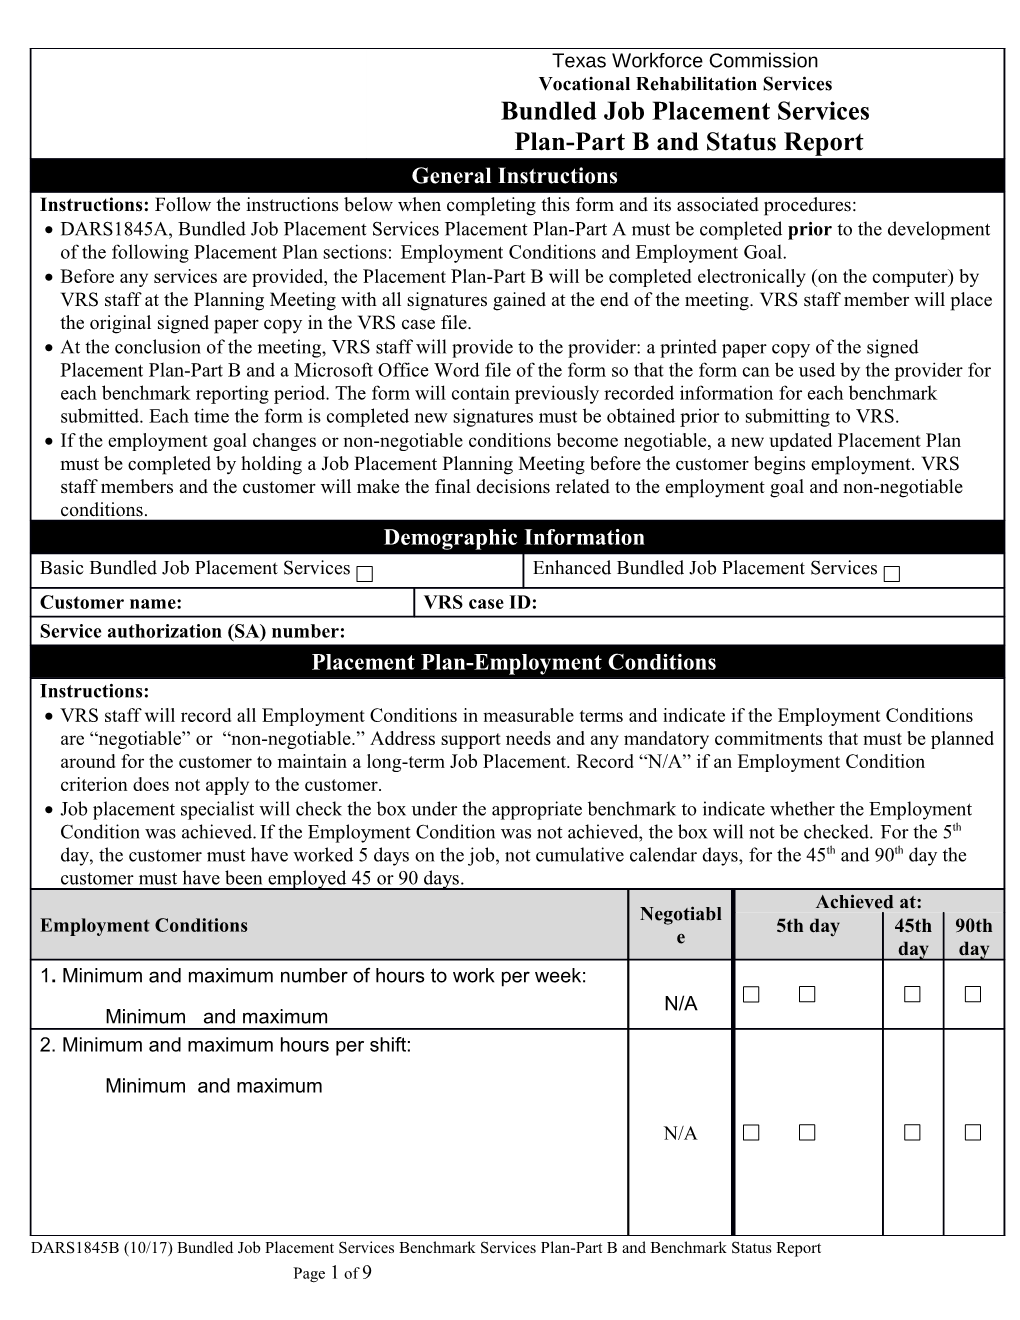 DARS1845B Bundled Job Placement Services Benchmark Services Plan-Part B and Benchmark Status